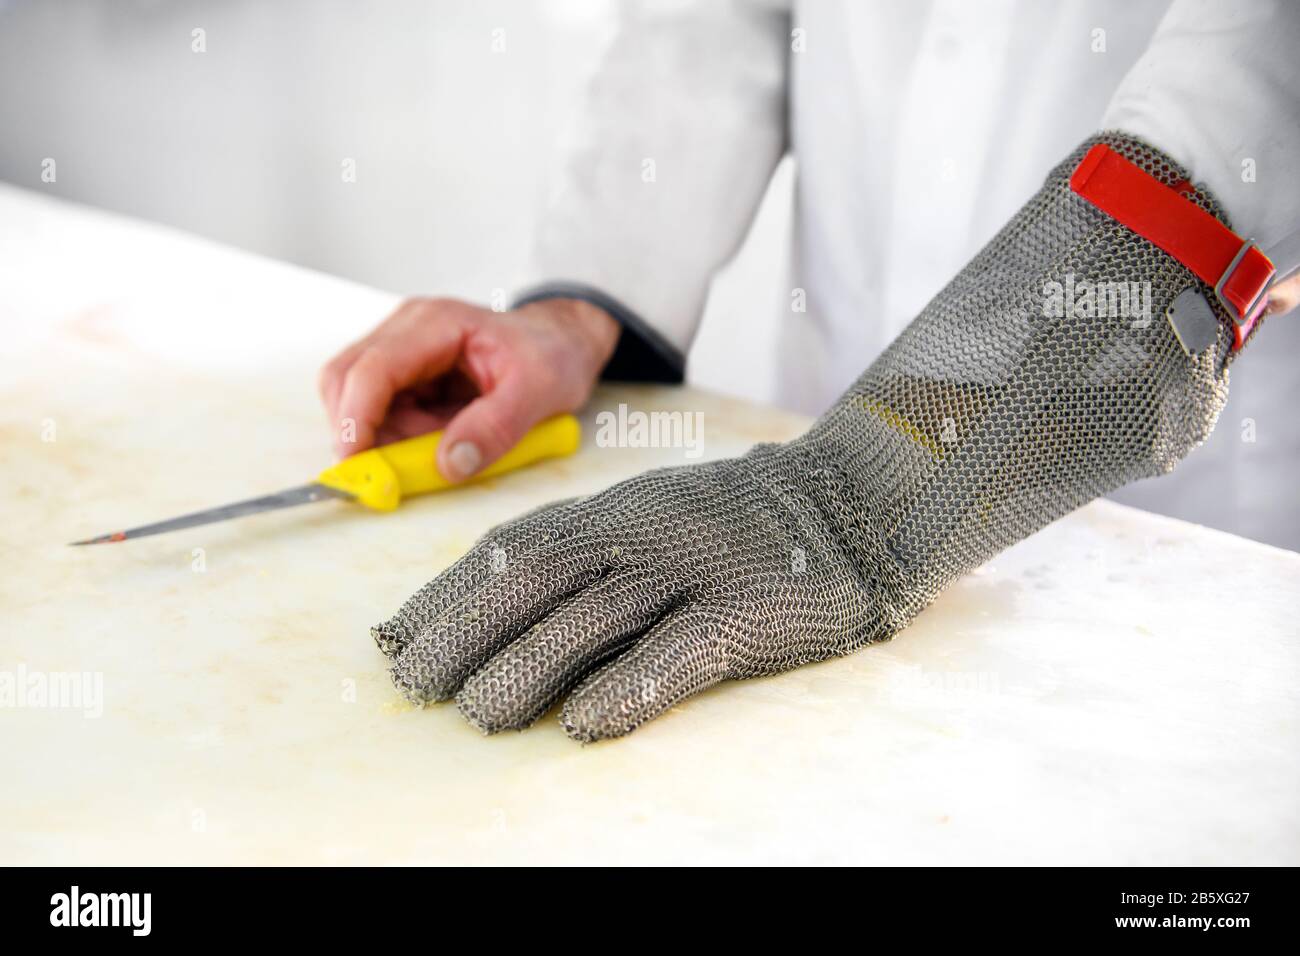 https://c8.alamy.com/comp/2B5XG27/close-up-on-a-chain-mail-butchers-protective-glove-with-metal-mesh-to-prevent-cuts-from-knives-on-the-hand-of-a-male-butcher-resting-on-a-cutting-boar-2B5XG27.jpg